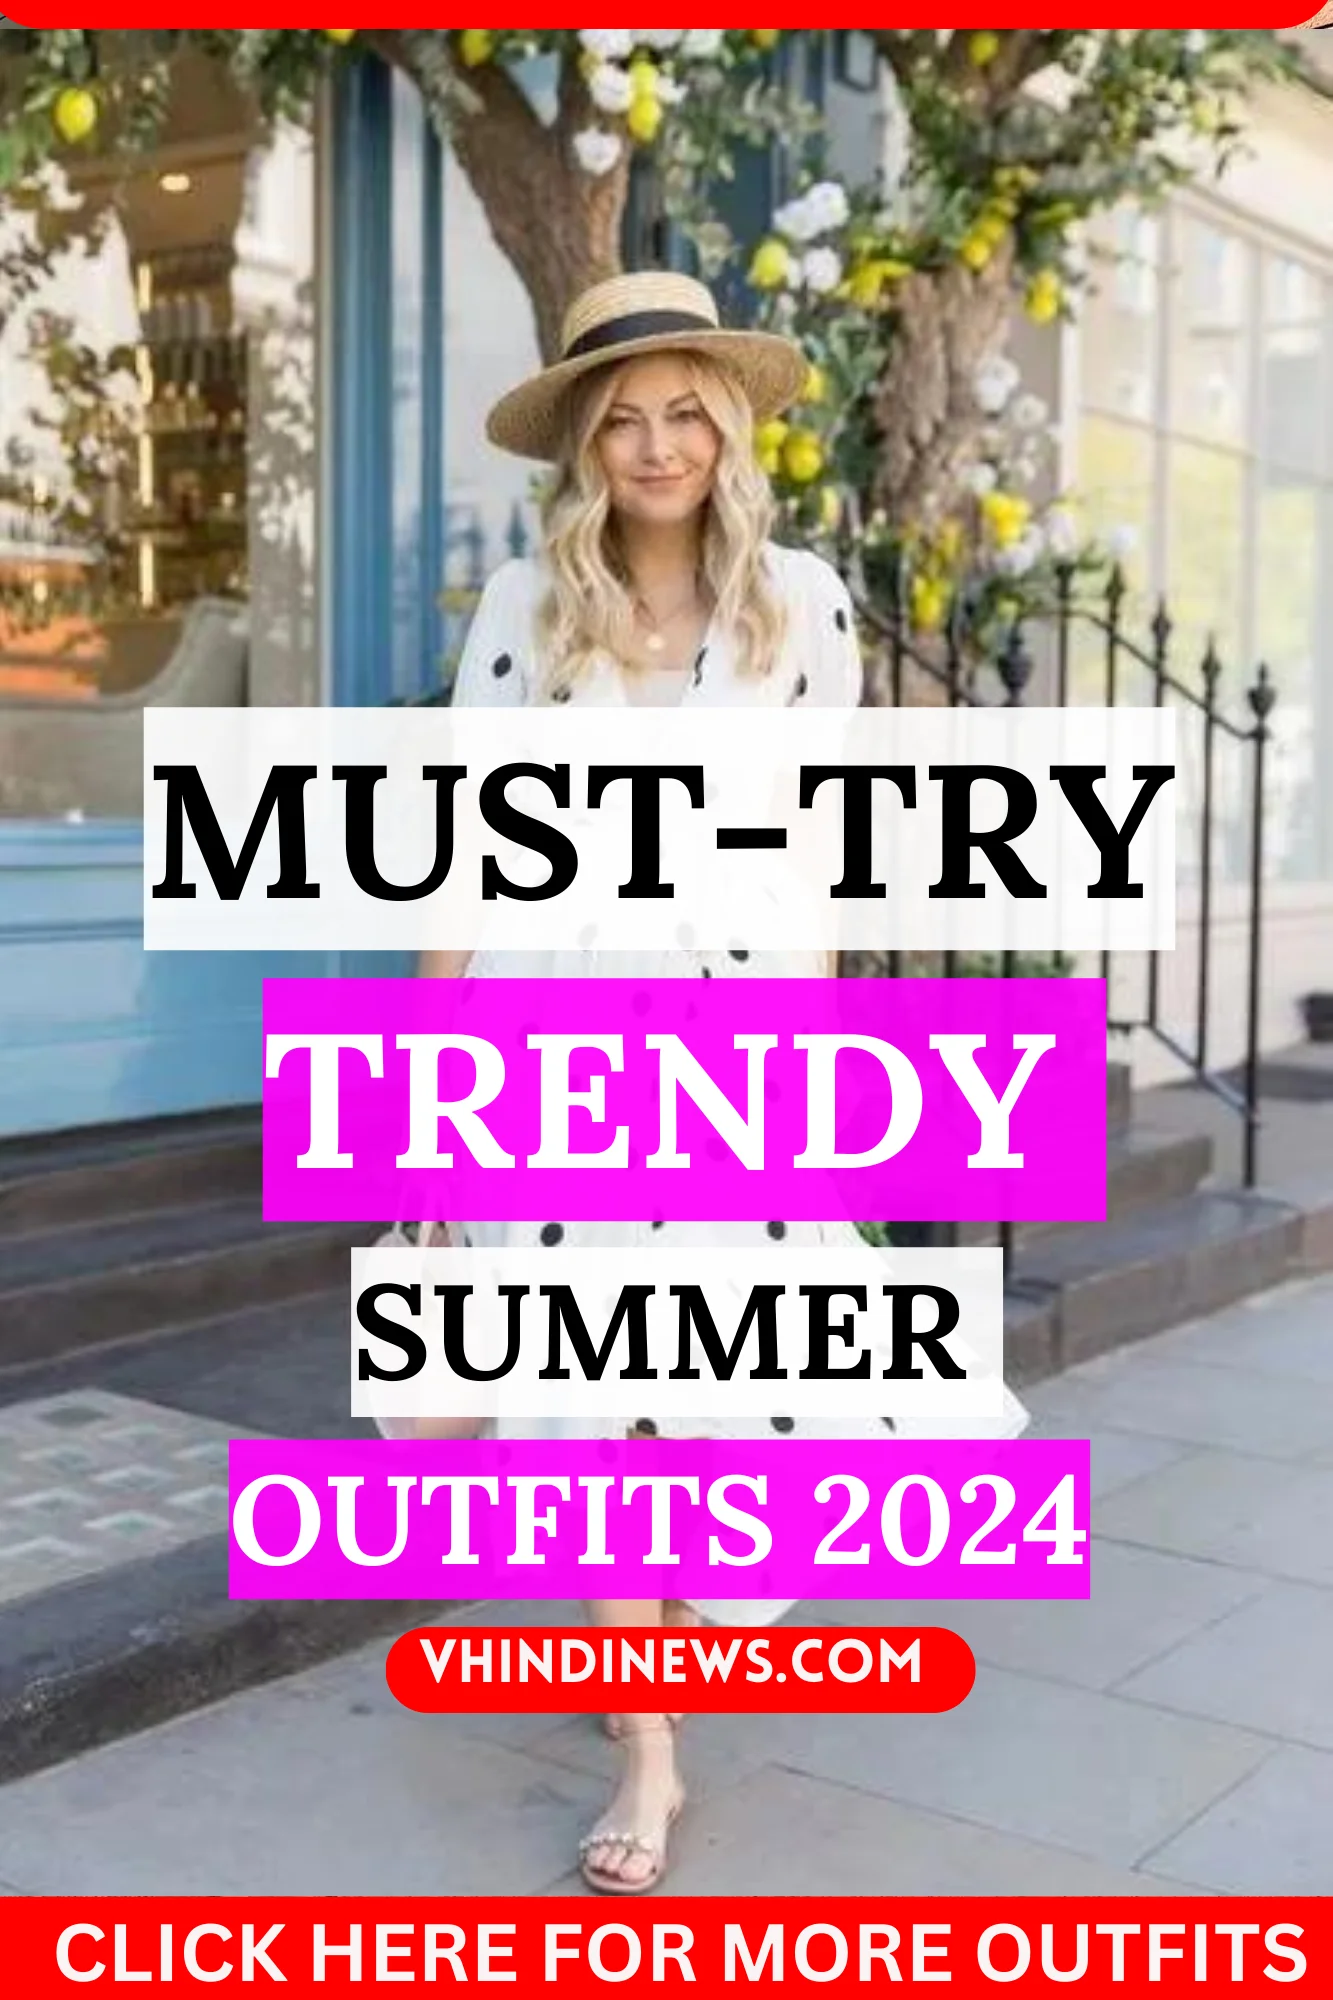 SUMMER OUTFITS 2024